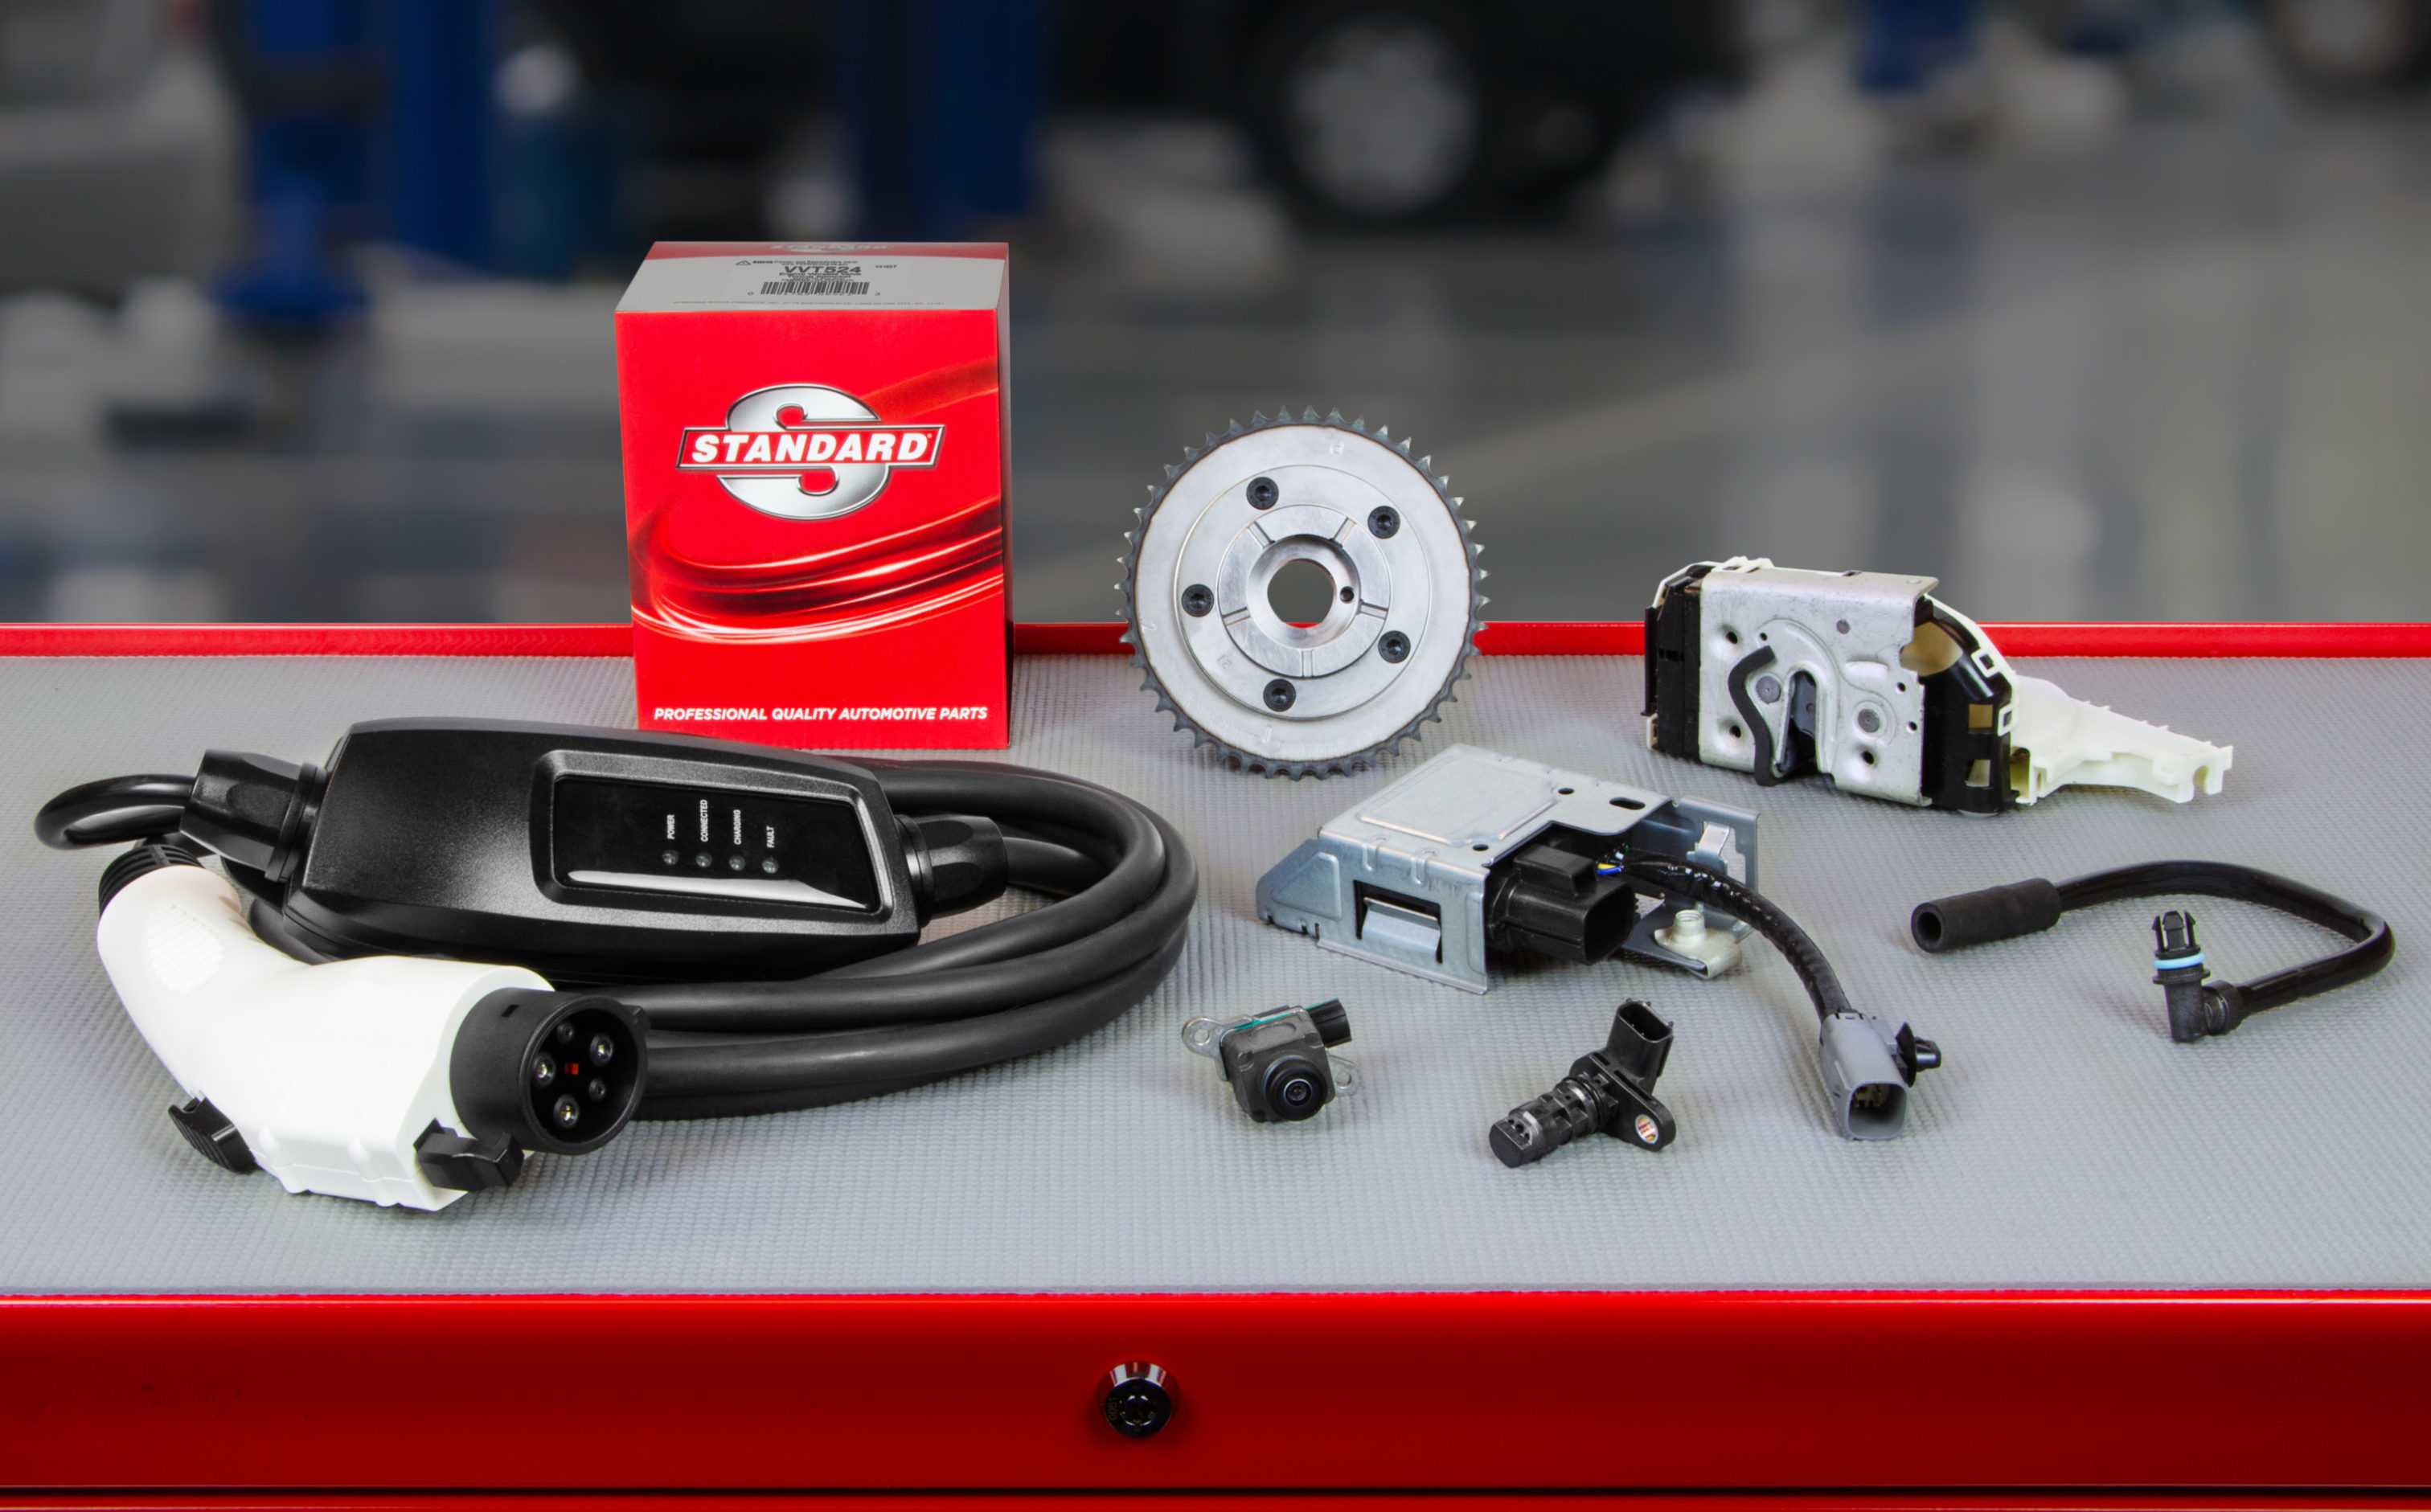 Standard Motor Products, Inc. (SMP) has introduced 276 new part numbers since the start of the year.